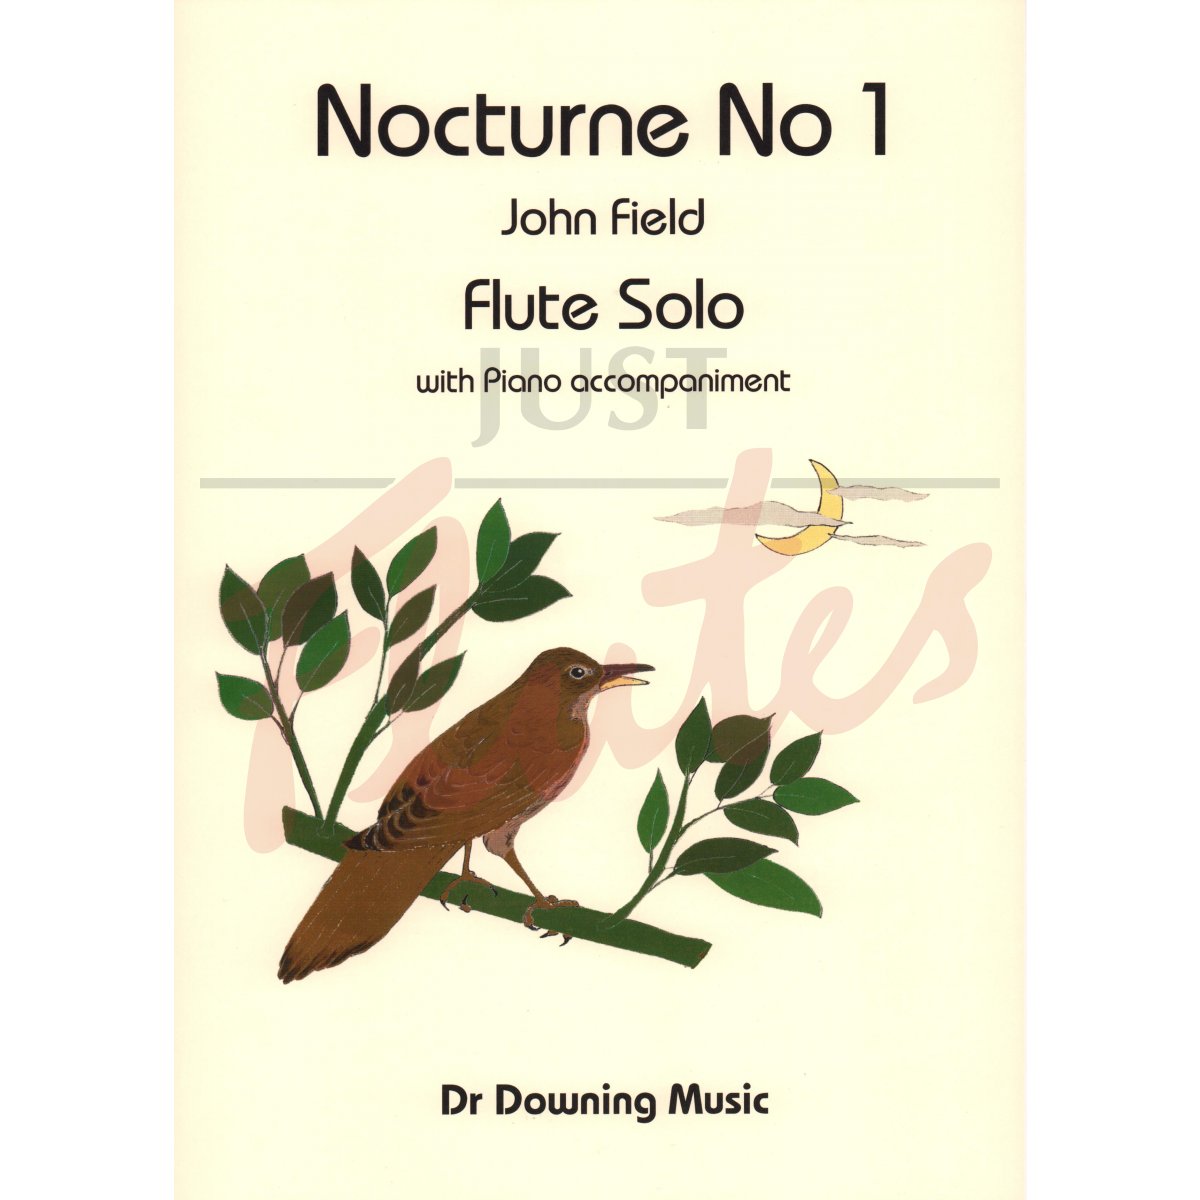 Nocturne No. 1 for Flute and Piano